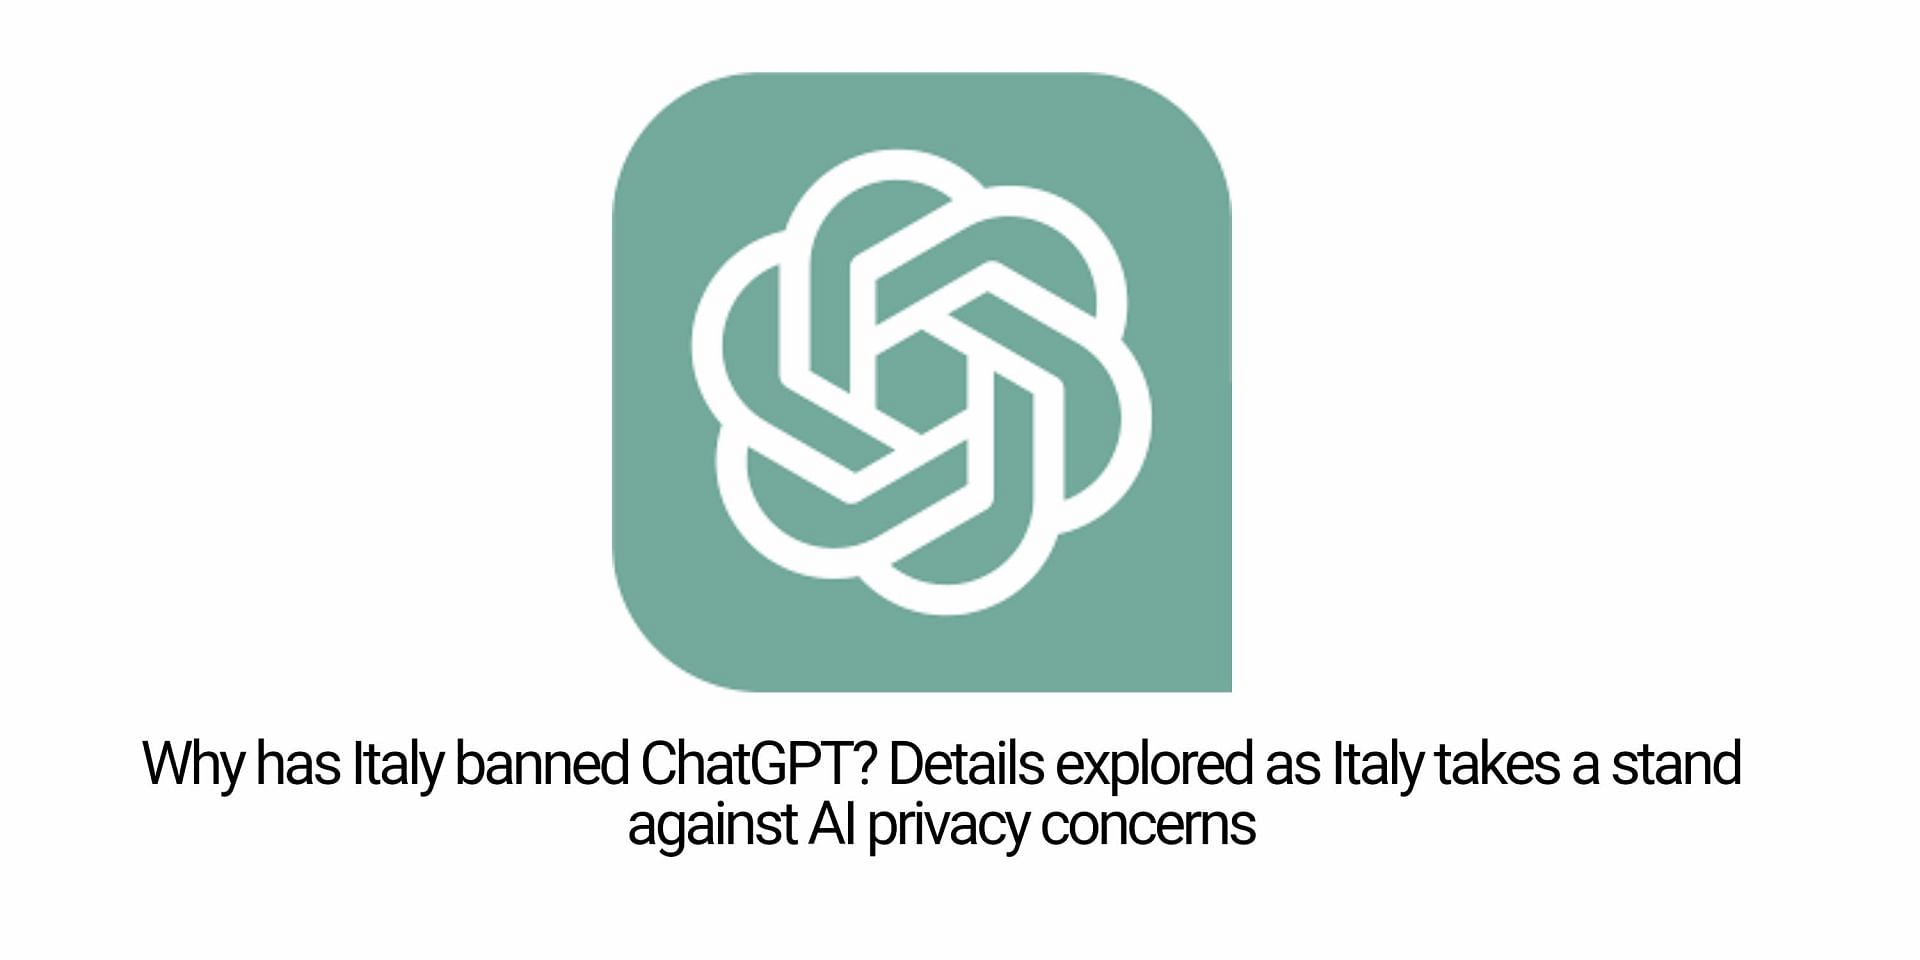 Italy has become the first country to ban the advanced AI ChatGPT: More details explored. (Image via Sportskeeda)